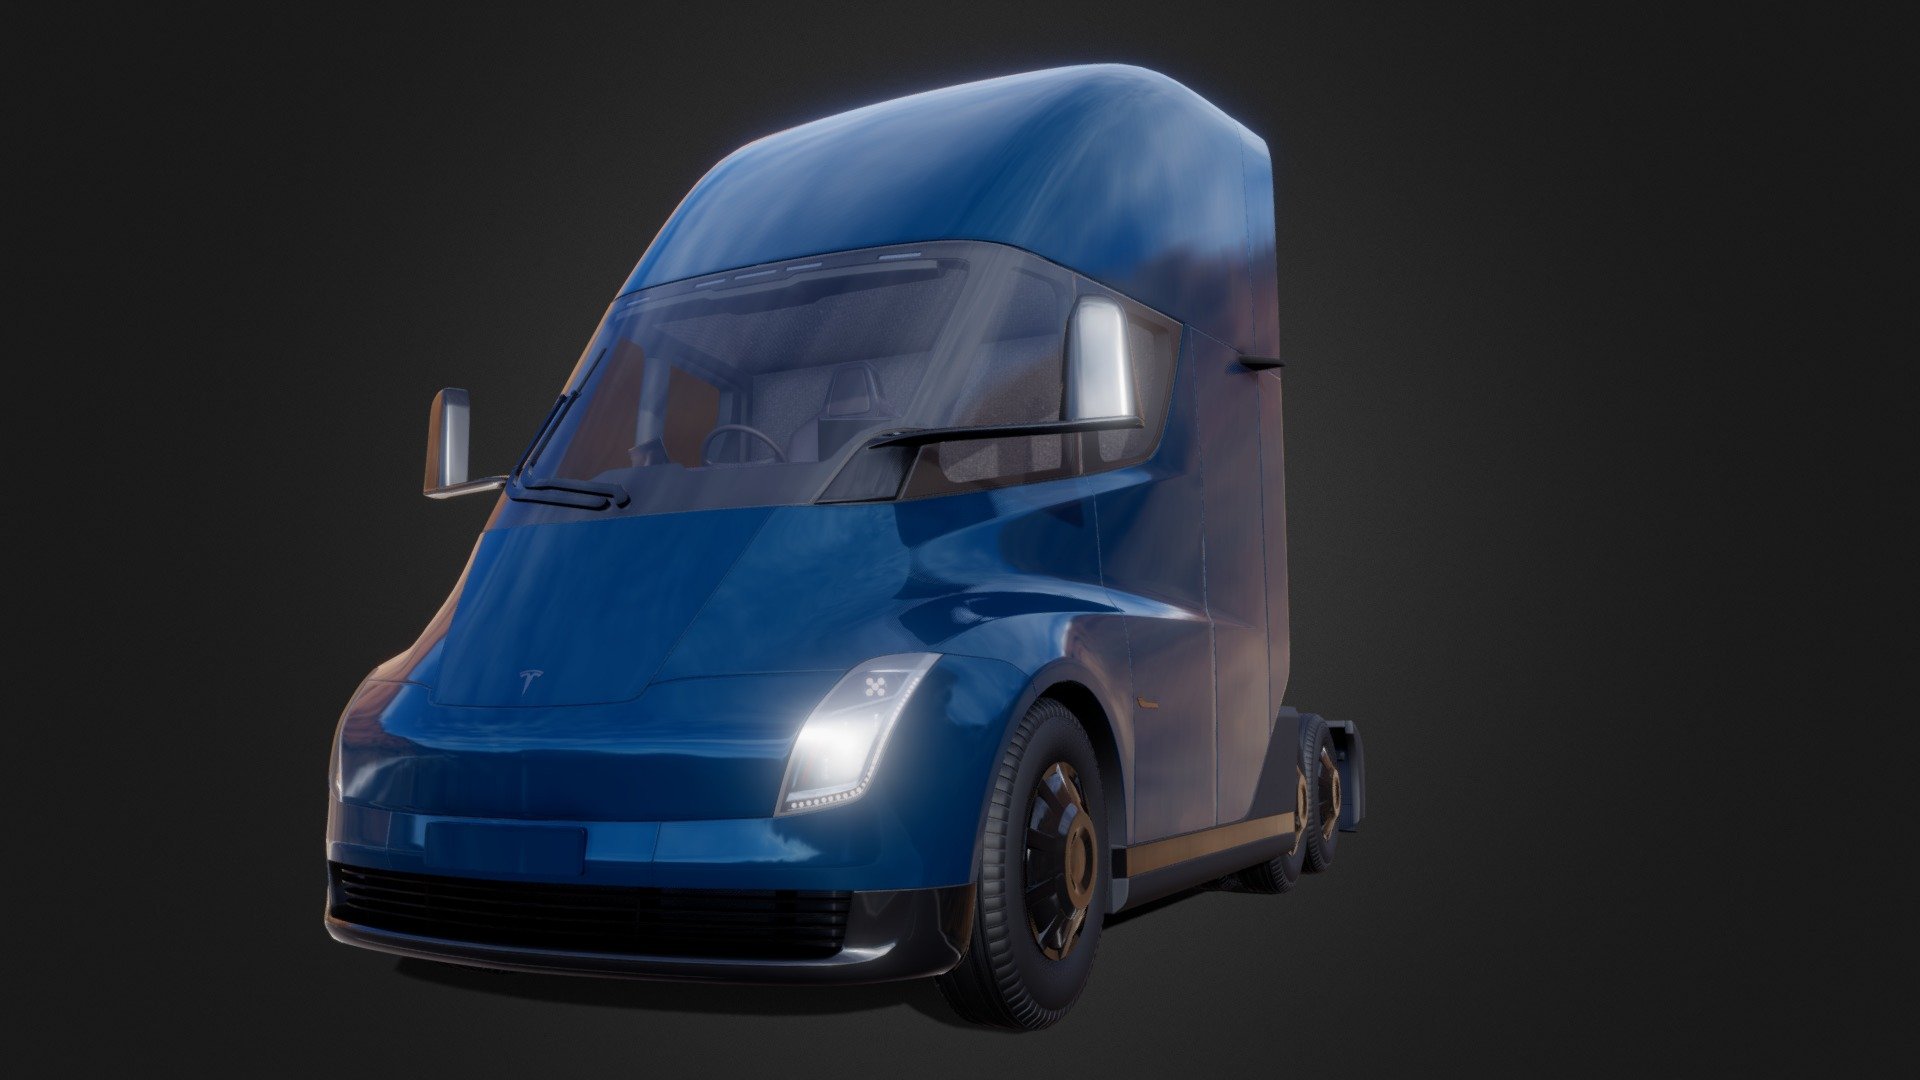 I modeled a Tesla Semi truck for you. The model is quite detailed and suitable for both VR and AR 3d model